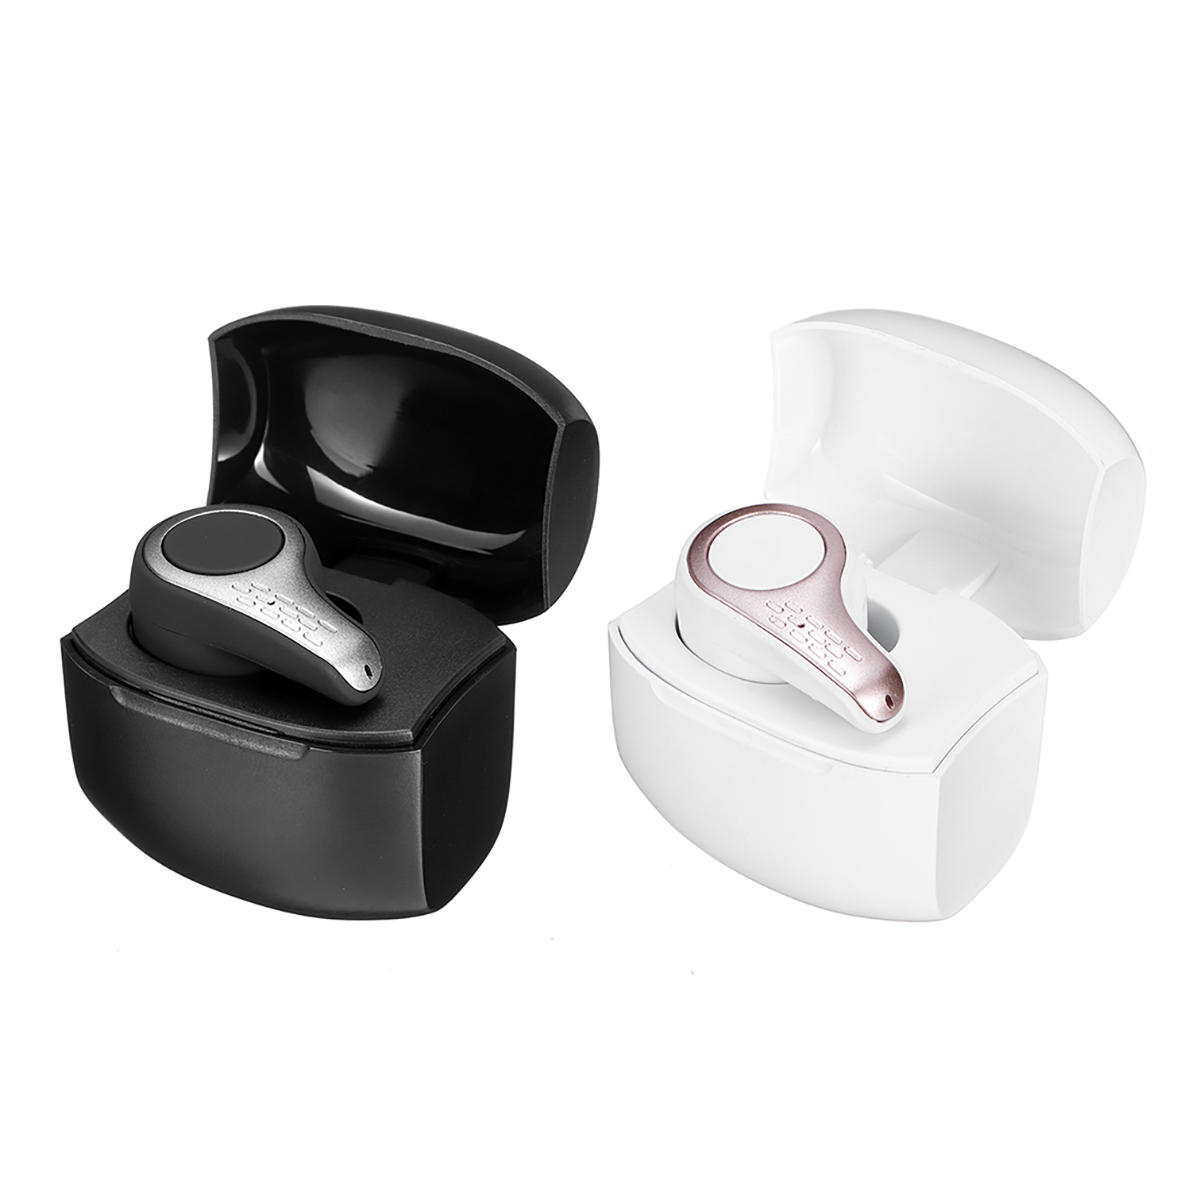 S9 Wireless Bluetooth 5.0 Single Earbuds Stereo Mini In-ear Sport Earphone Headphone With Portable Charging Box